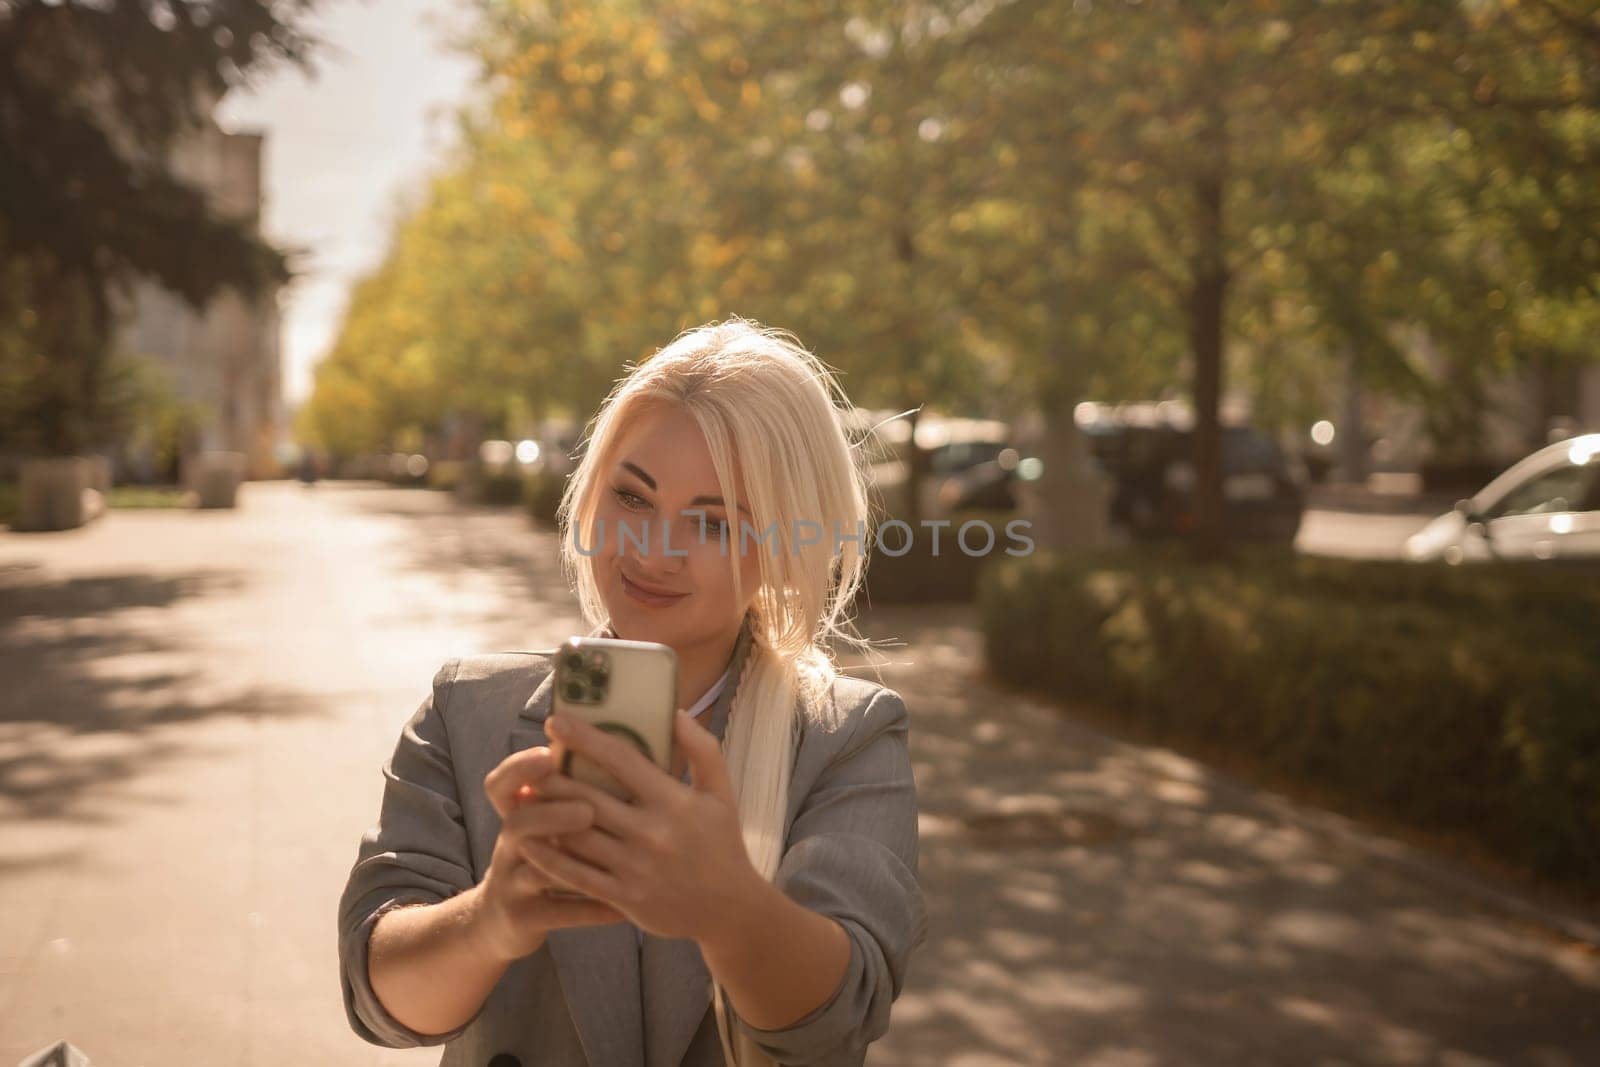 A woman is taking a picture of herself with her cell phone. She is wearing a gray jacket and scarf. The scene is set in a city with trees and cars in the background